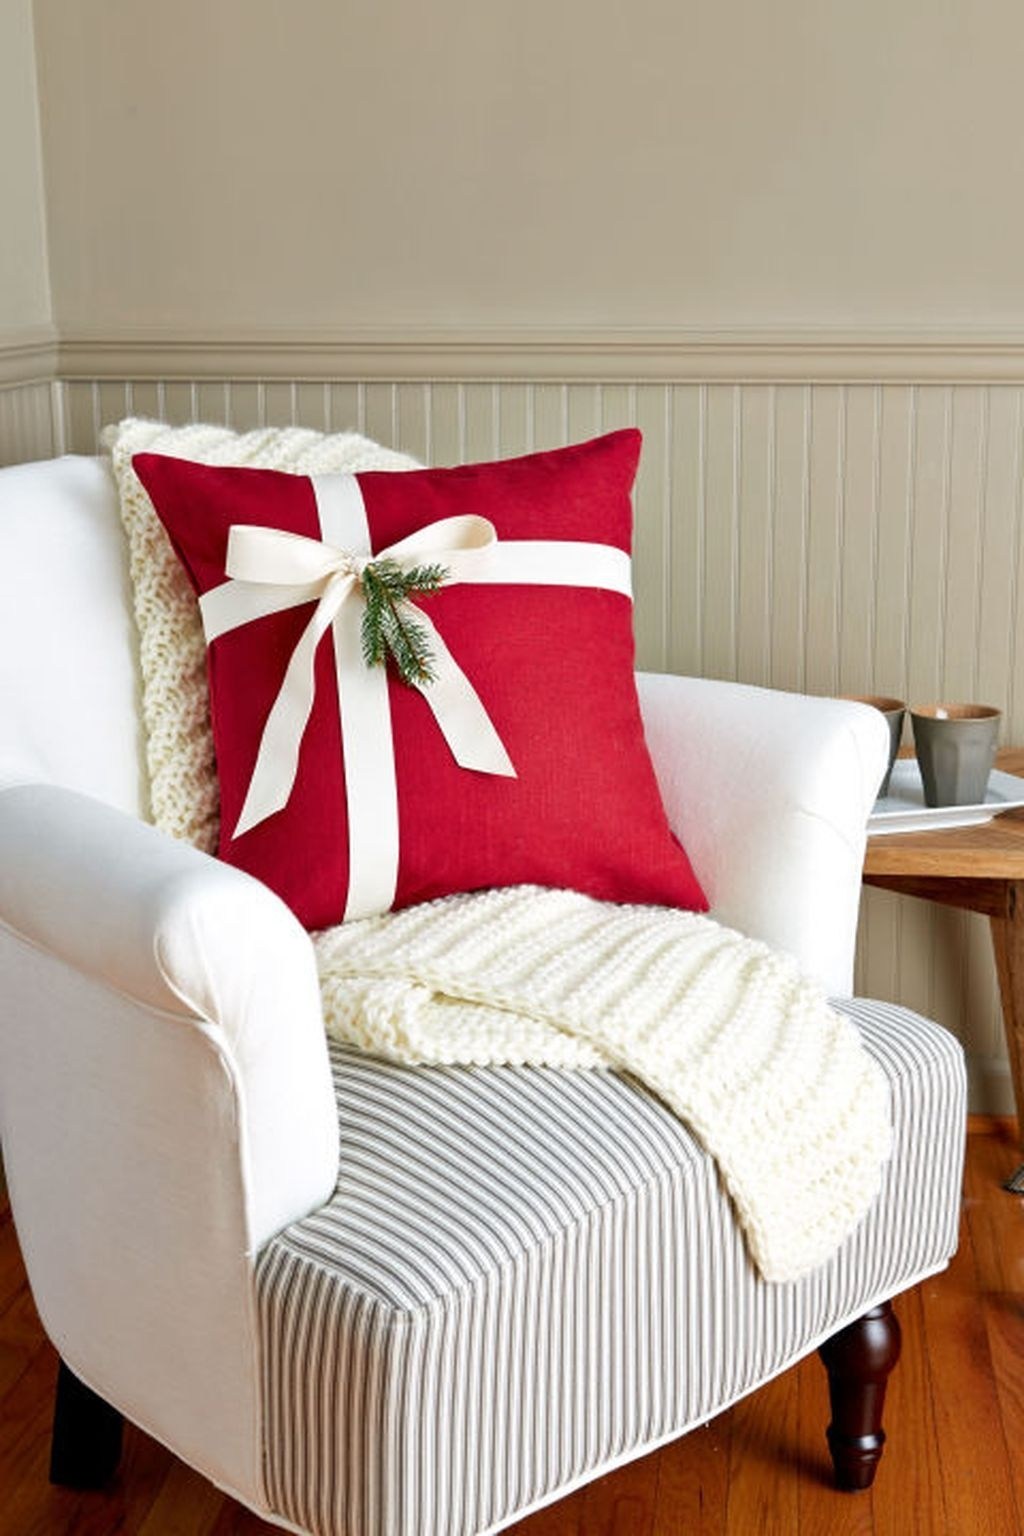 35 Gleaming Red Christmas Throw Pillows Ideas > Detectview